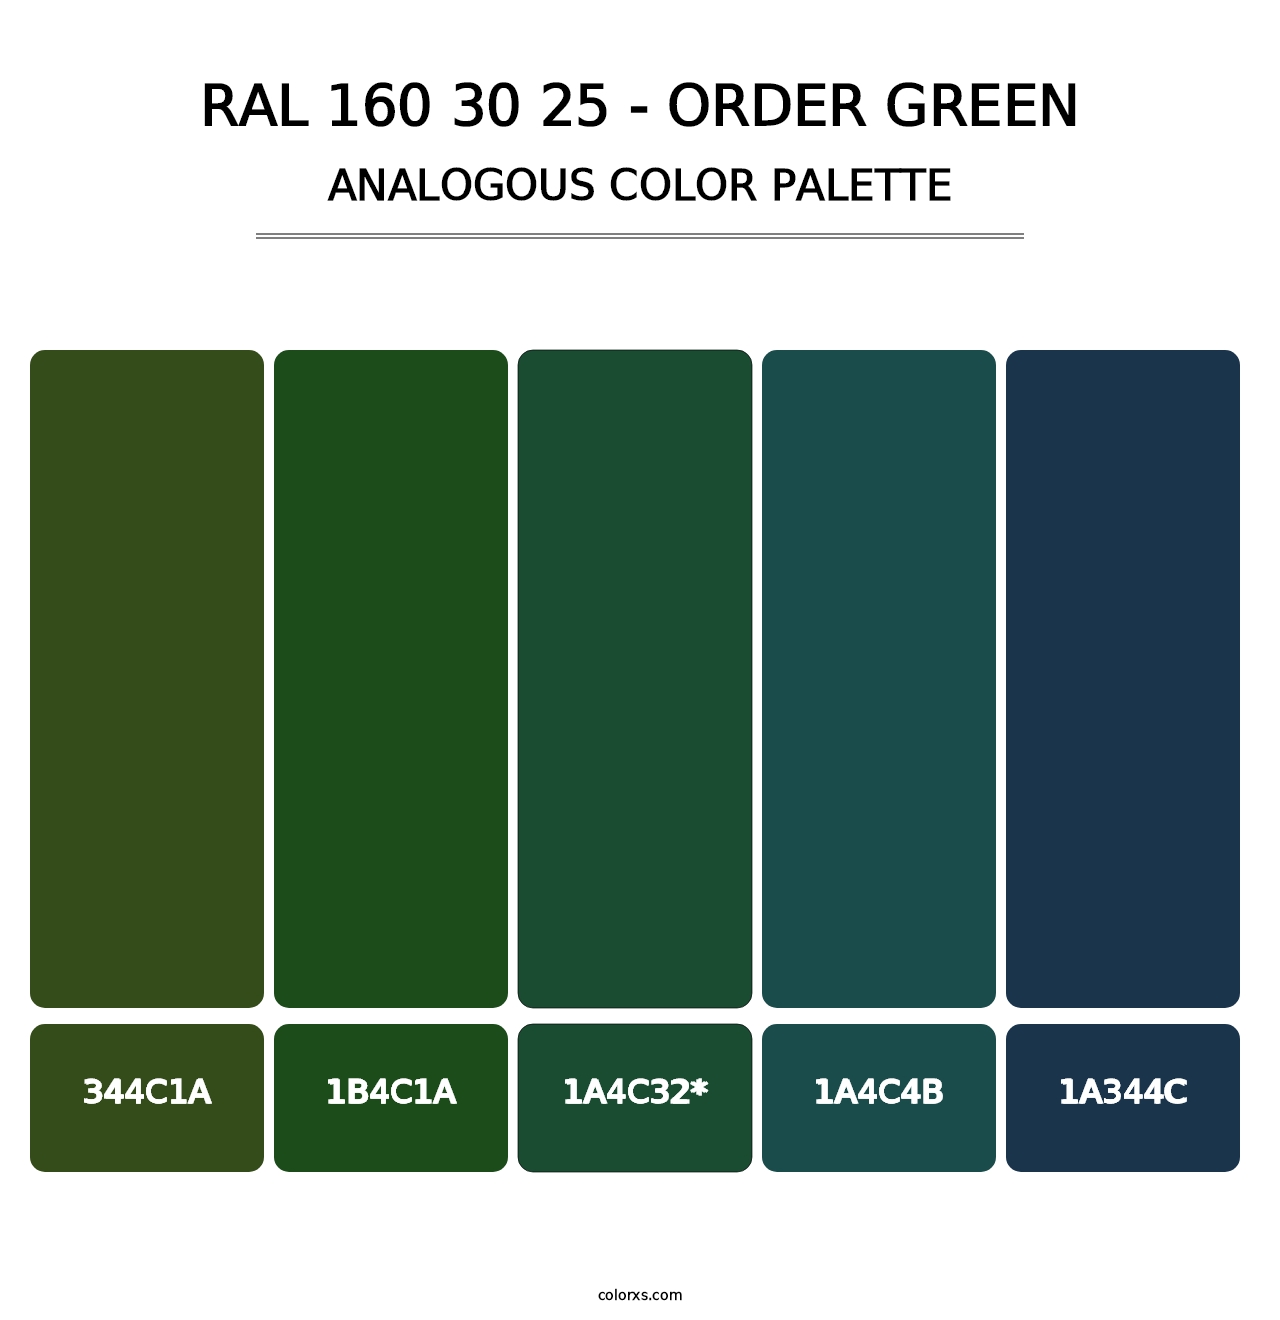 RAL 160 30 25 - Order Green - Analogous Color Palette